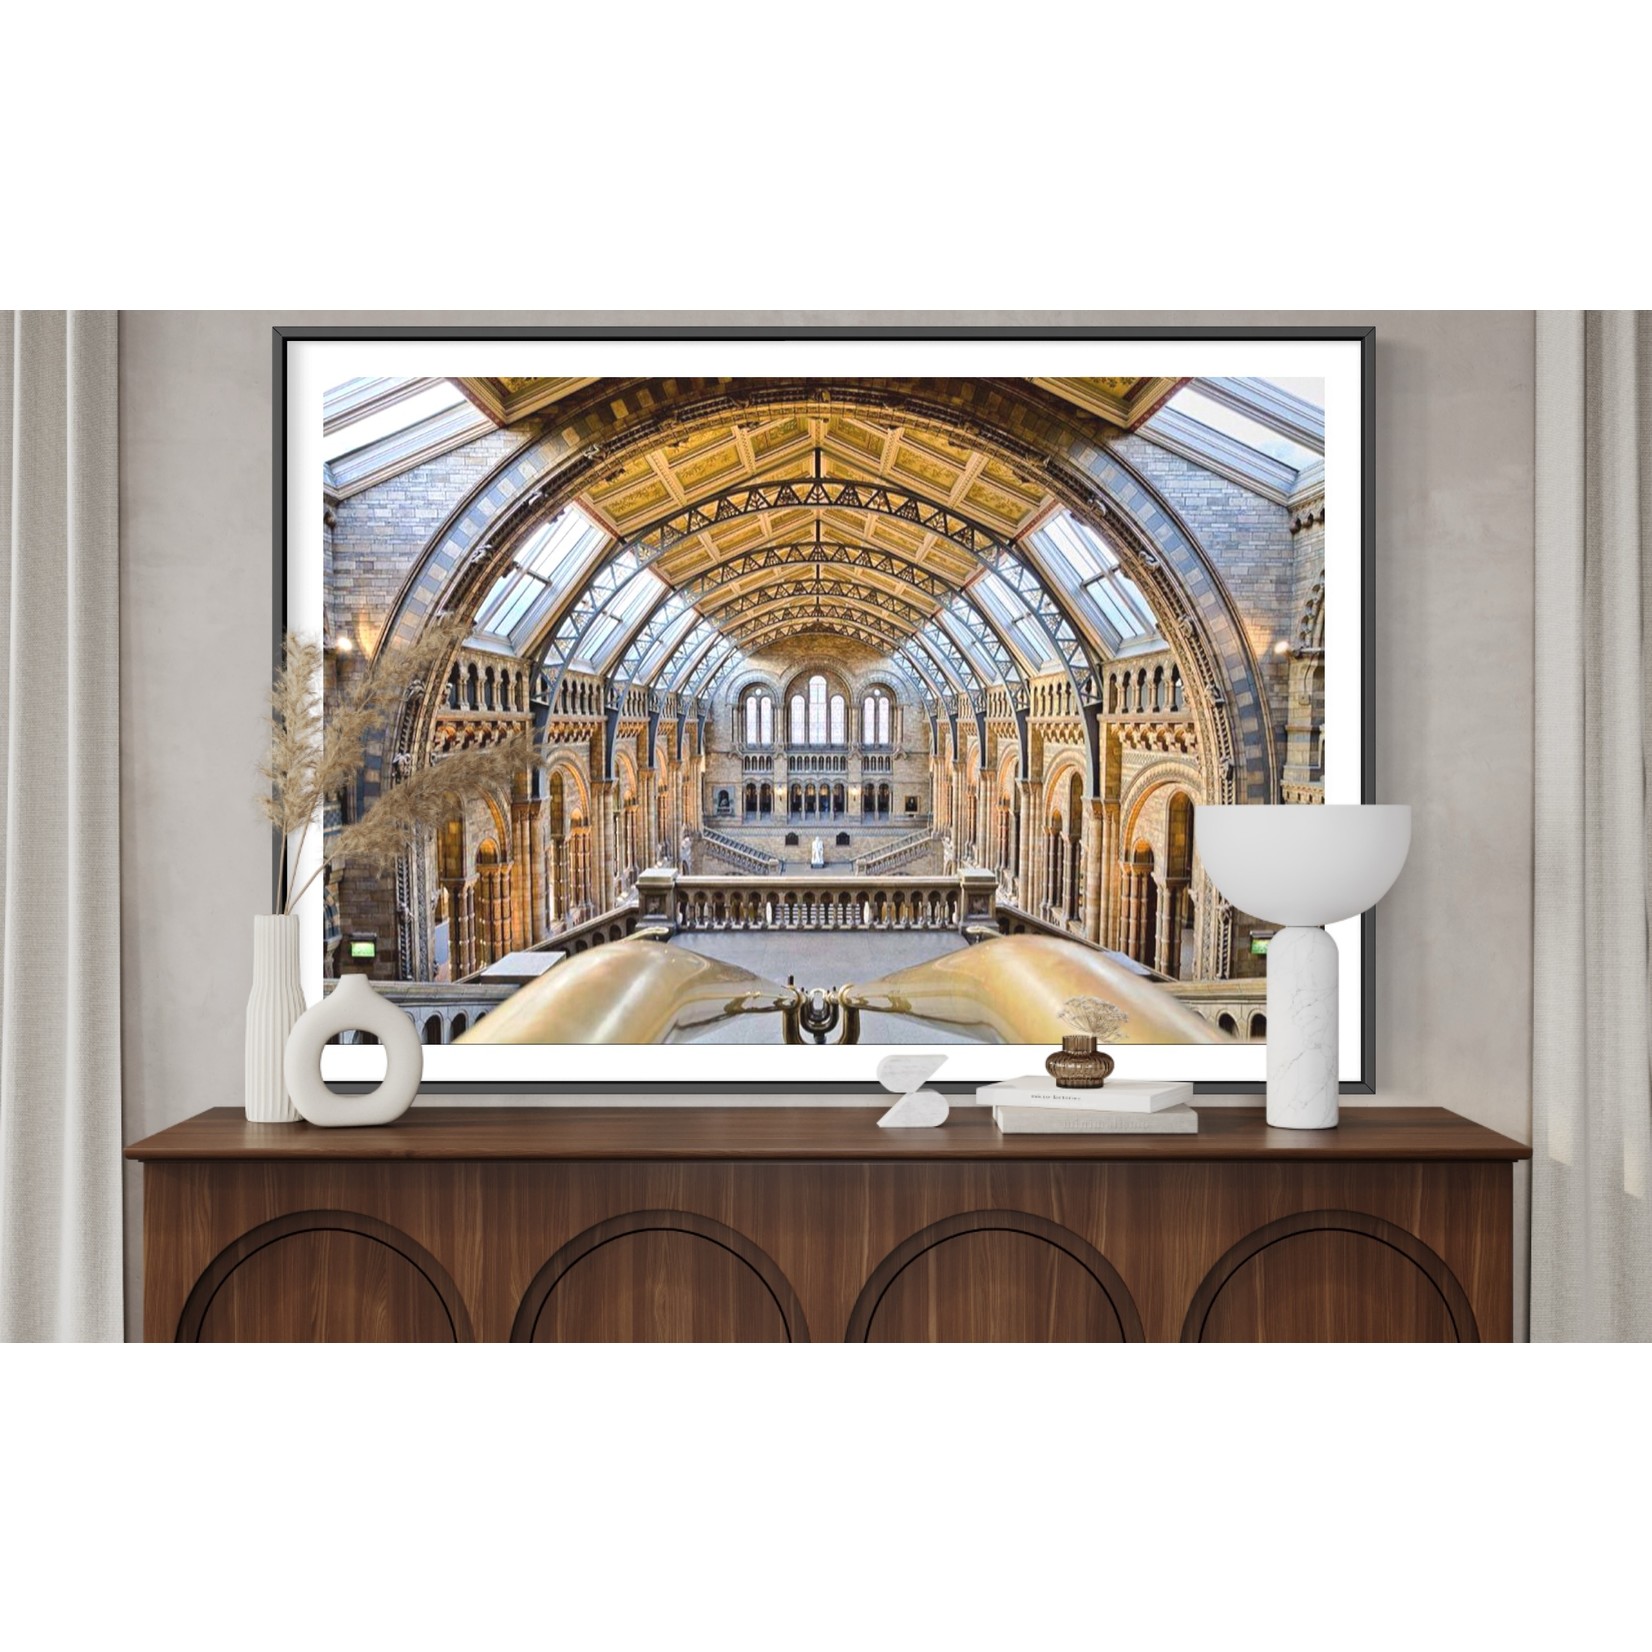 Framed Print on Rag Paper: The National History Museum by M. Beck